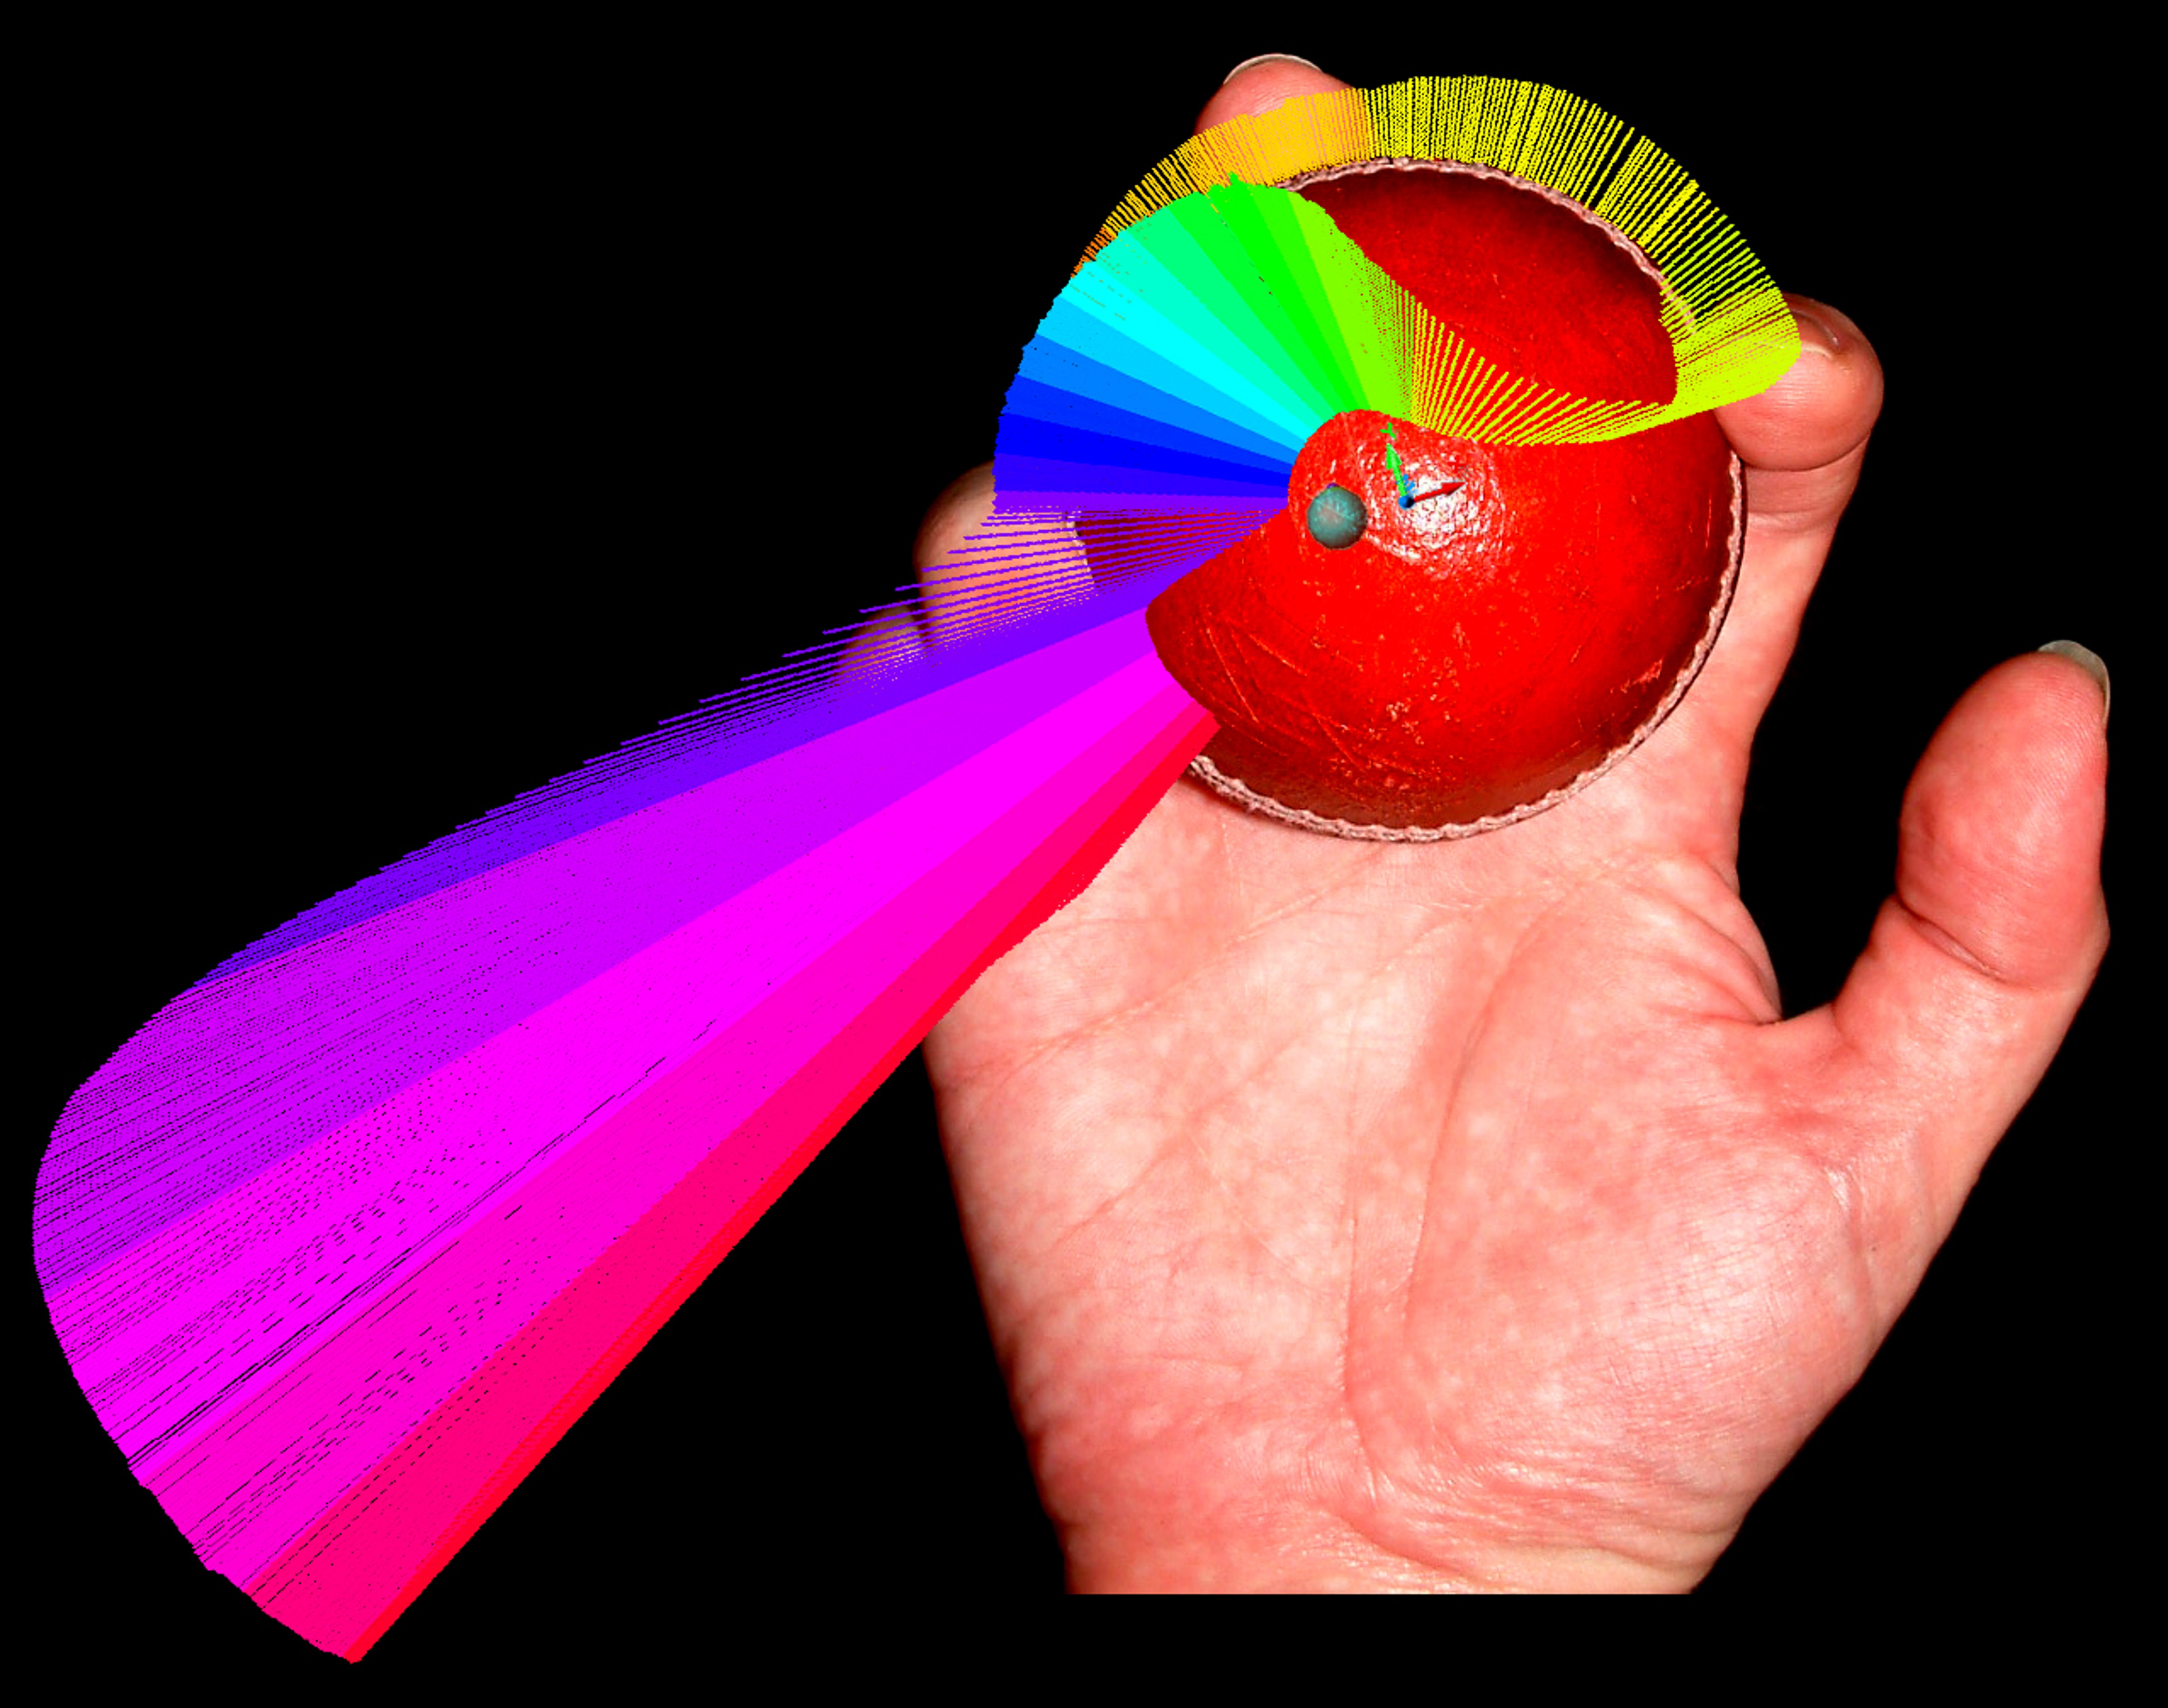 Sensors Free Full-Text Mobile Computing with a Smart Cricket Ball Discovery of Novel Performance Parameters and Their Practical Application to Performance Analysis, Advanced Profiling, Talent Identification and Training Interventions of